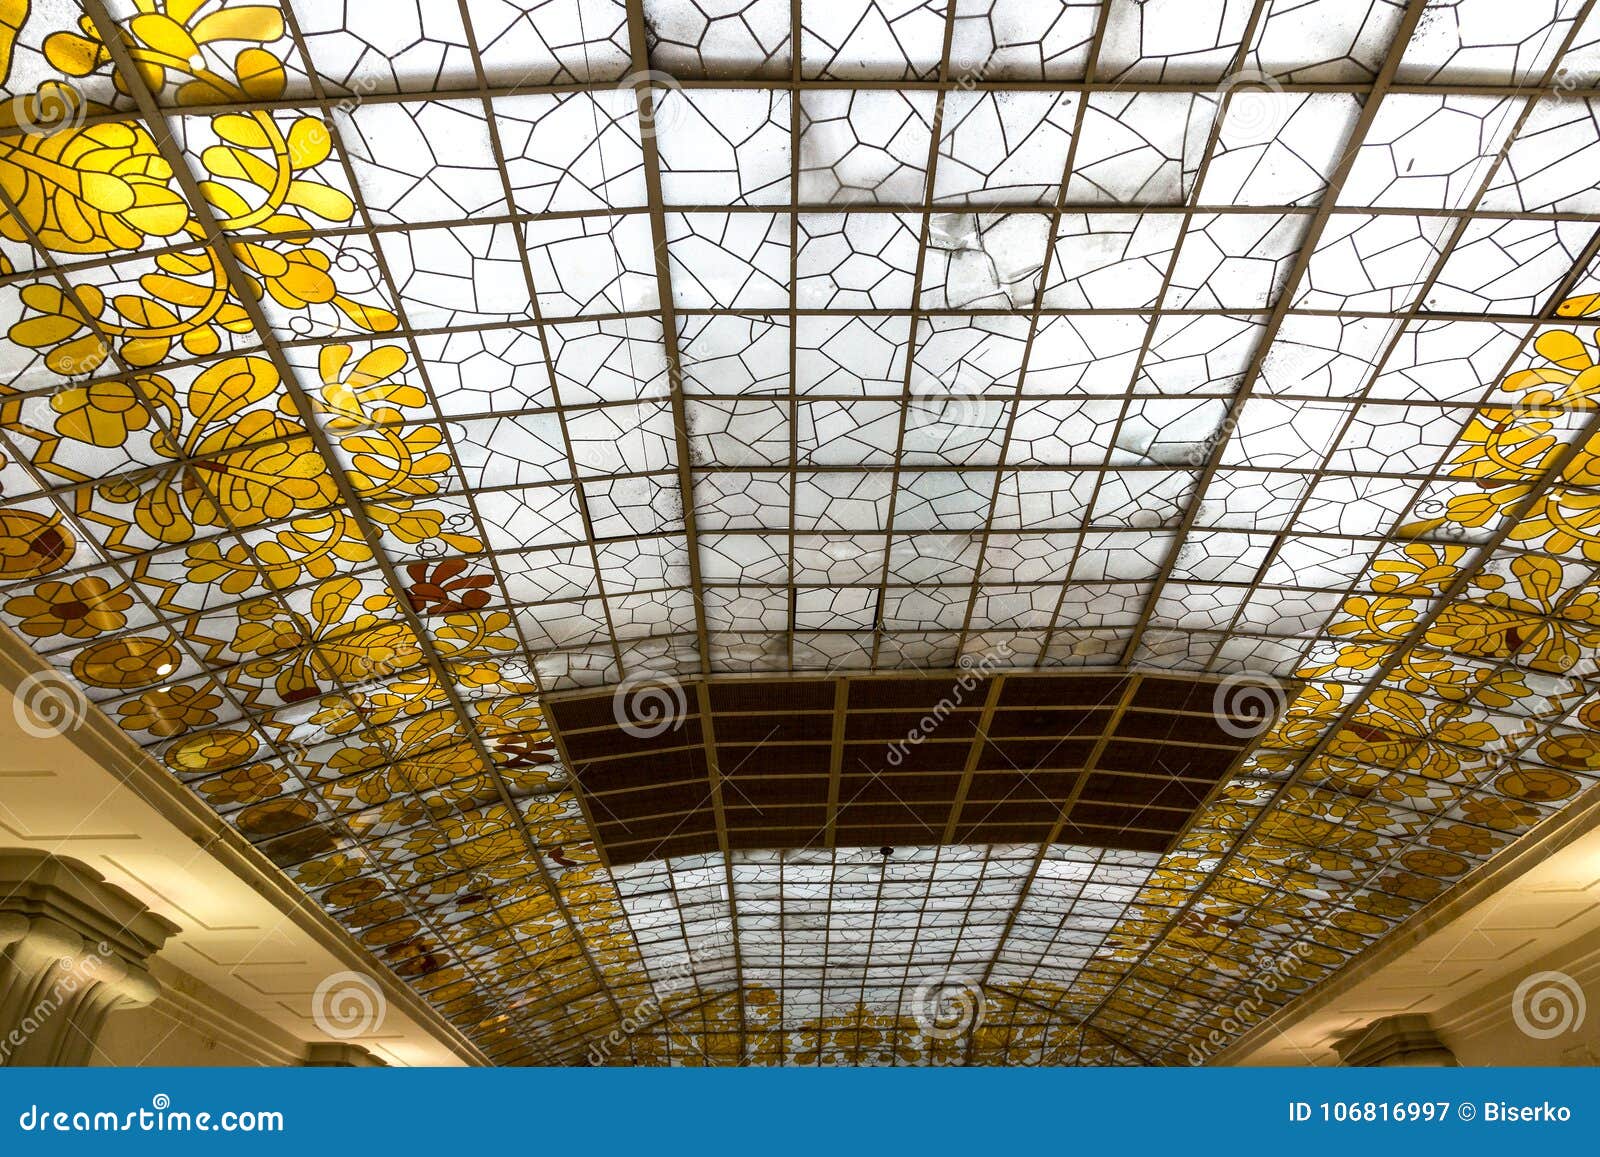 Art Deco Glass Ceiling Stock Image Image Of Decoration 106816997